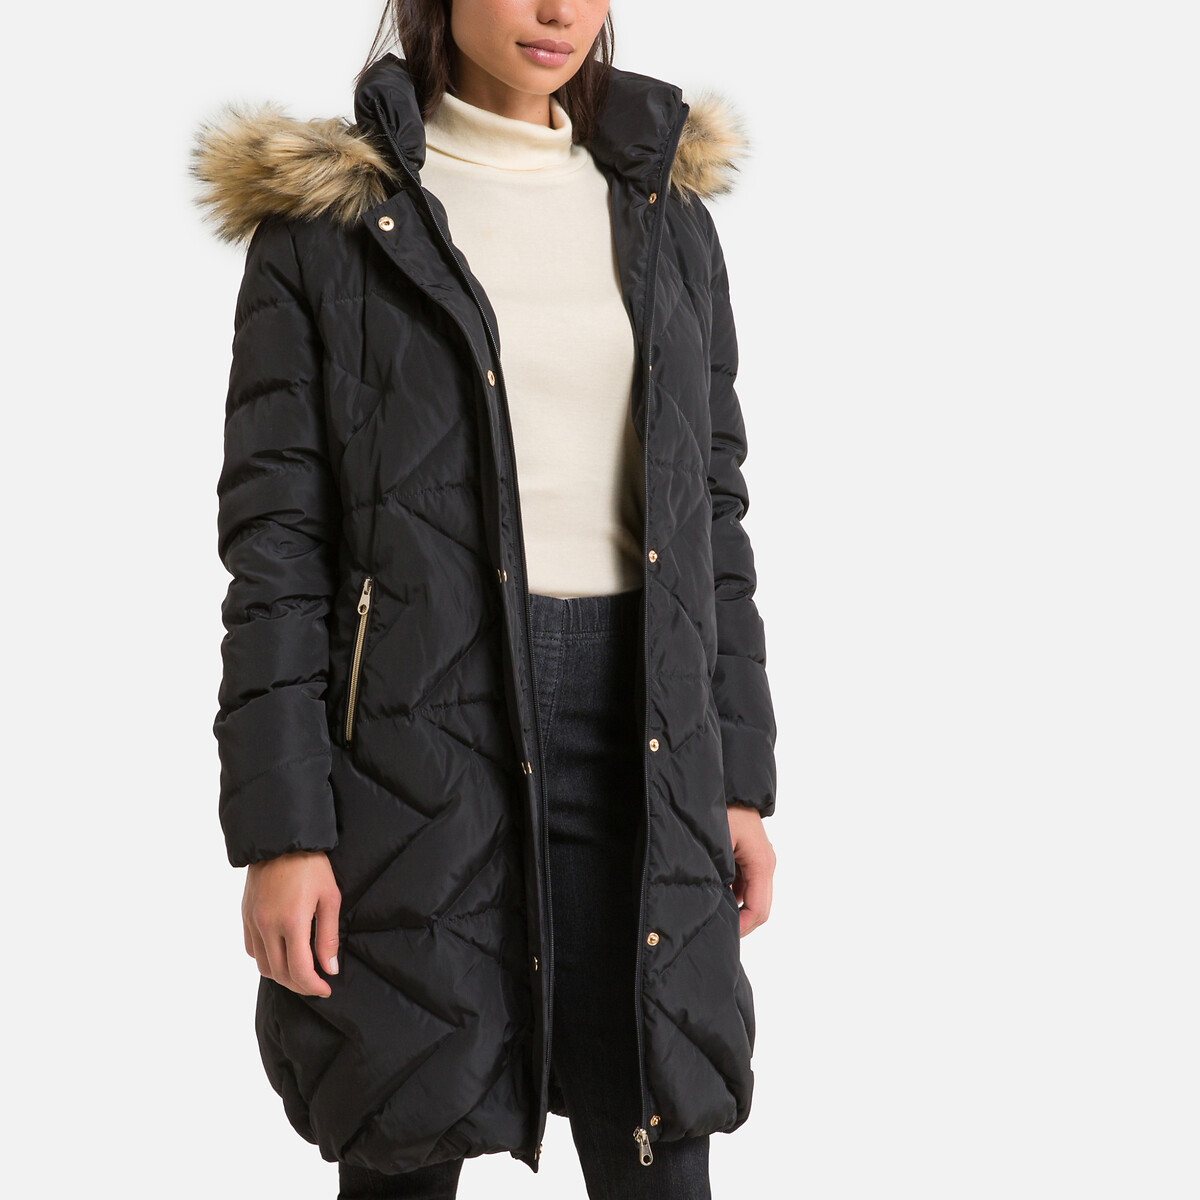 Long Padded Winter Jacket with Hood